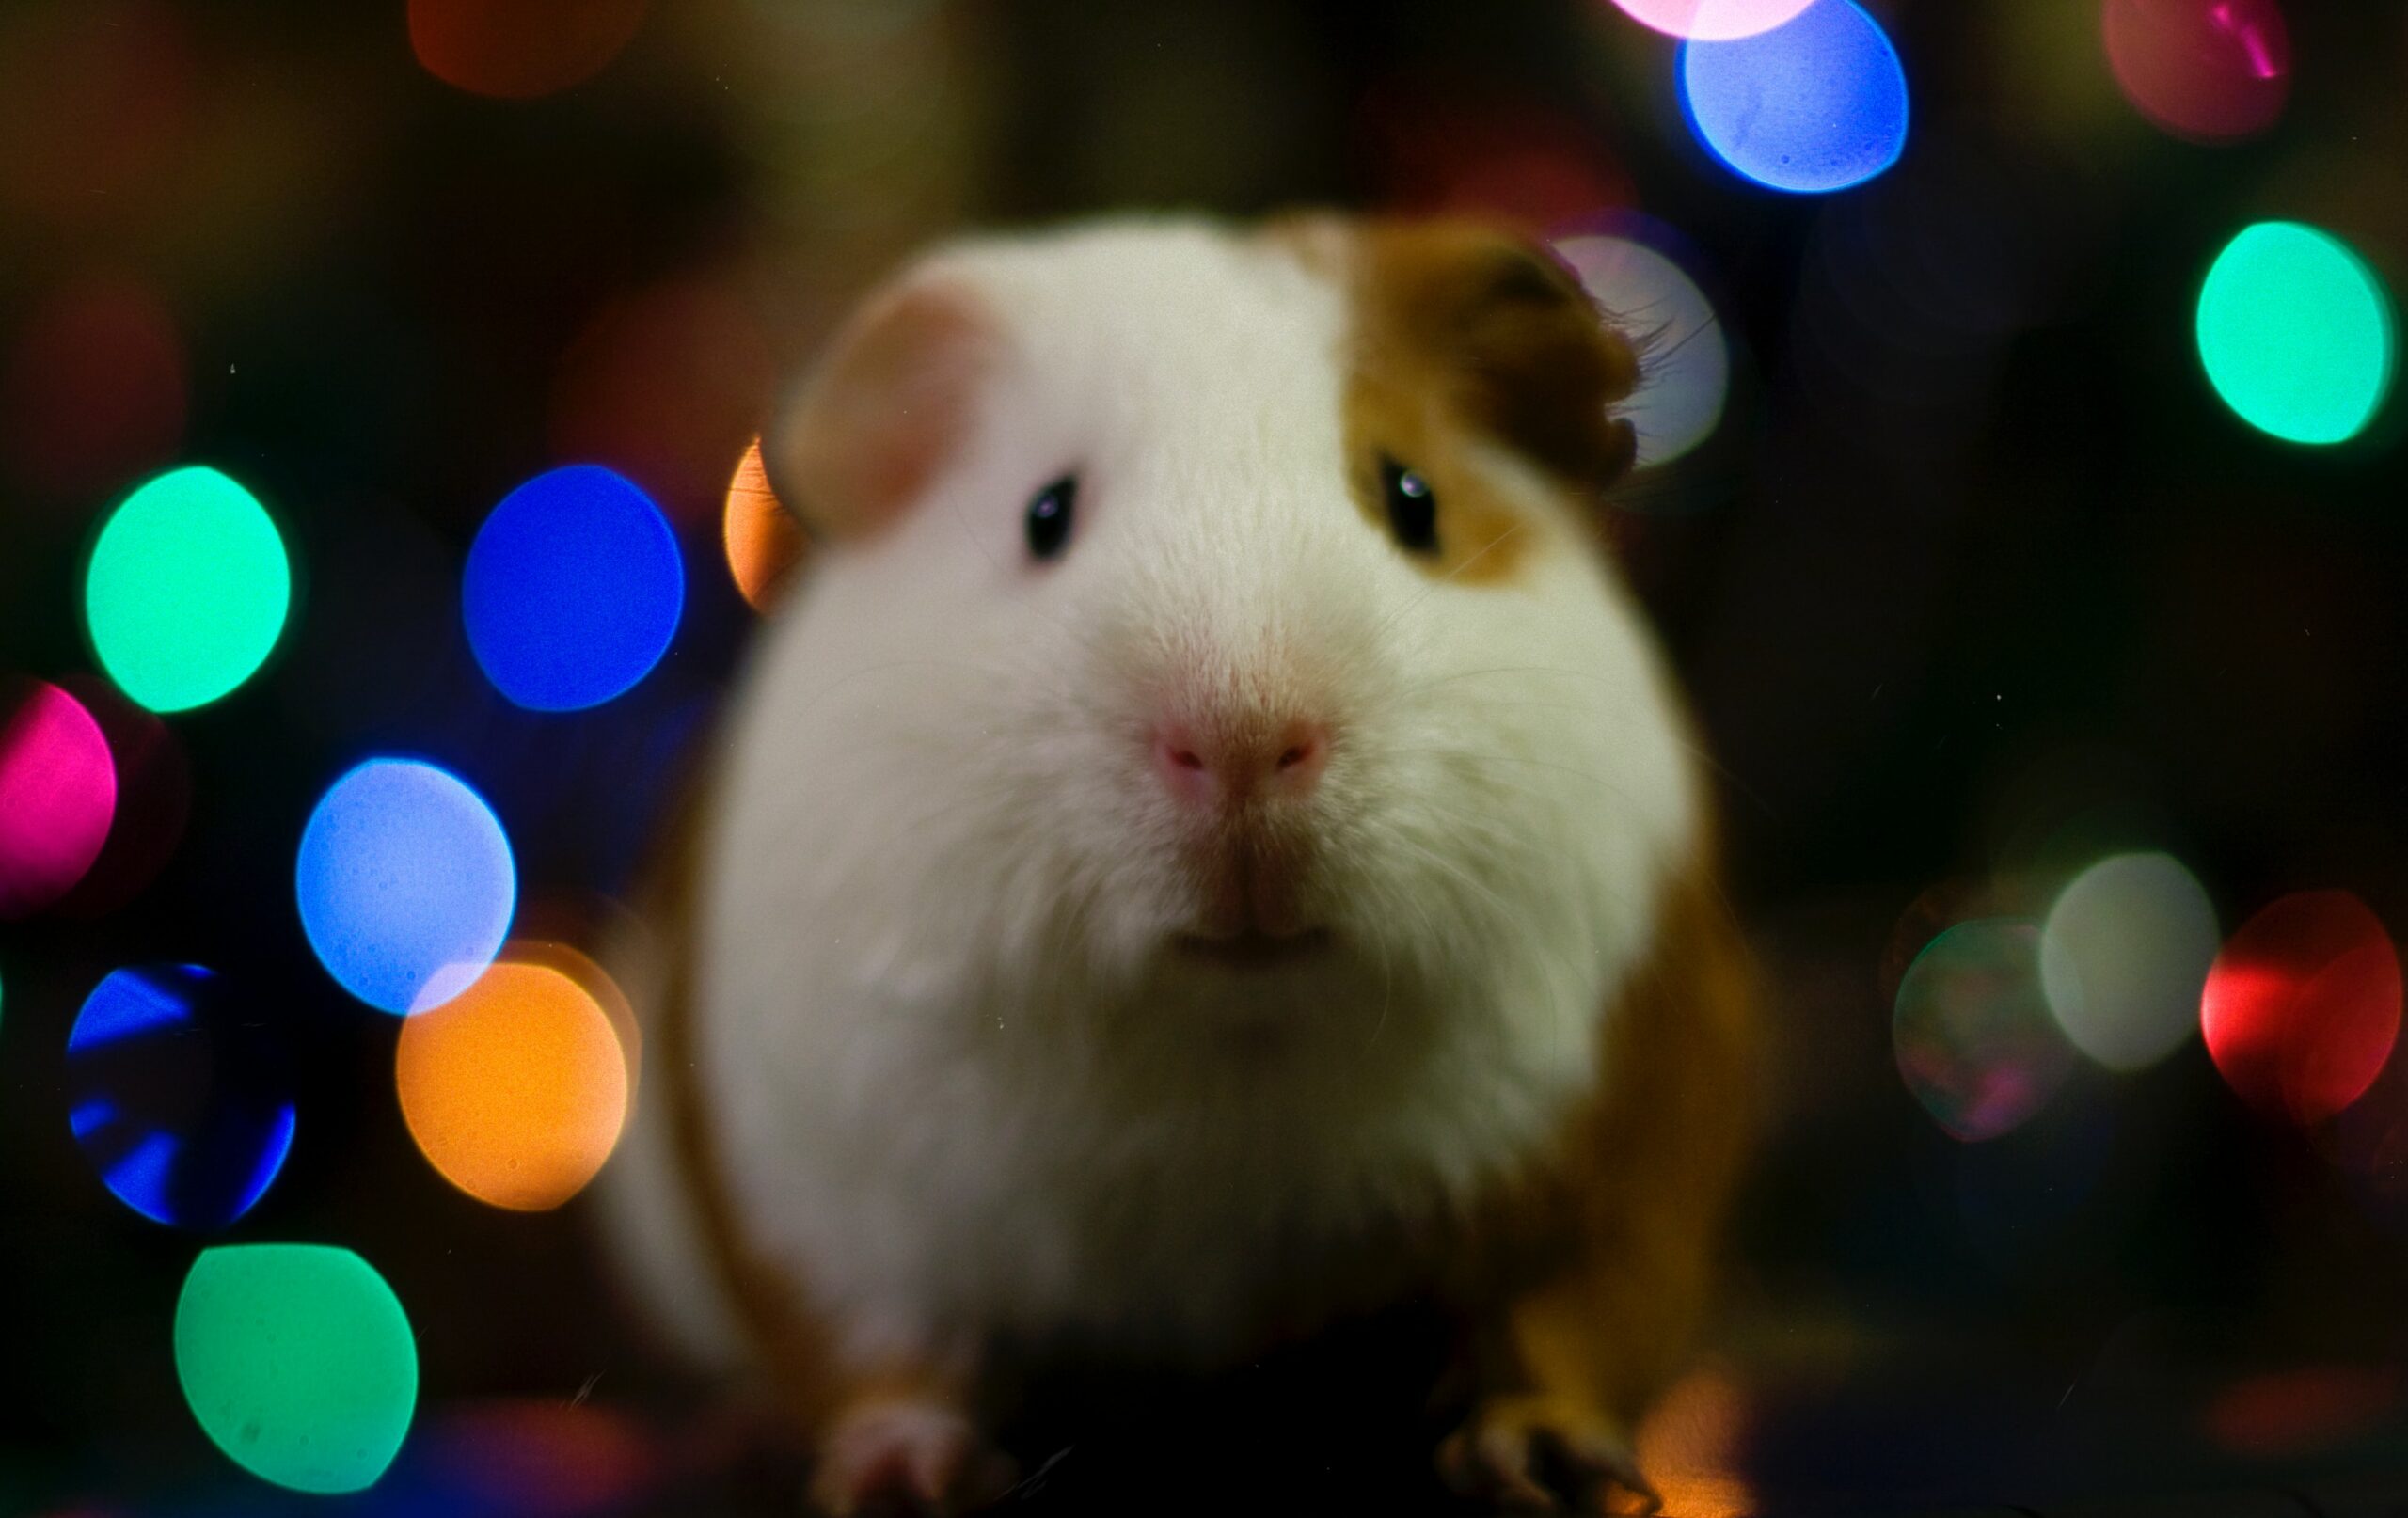 Do Hamsters feel pain when they fall?